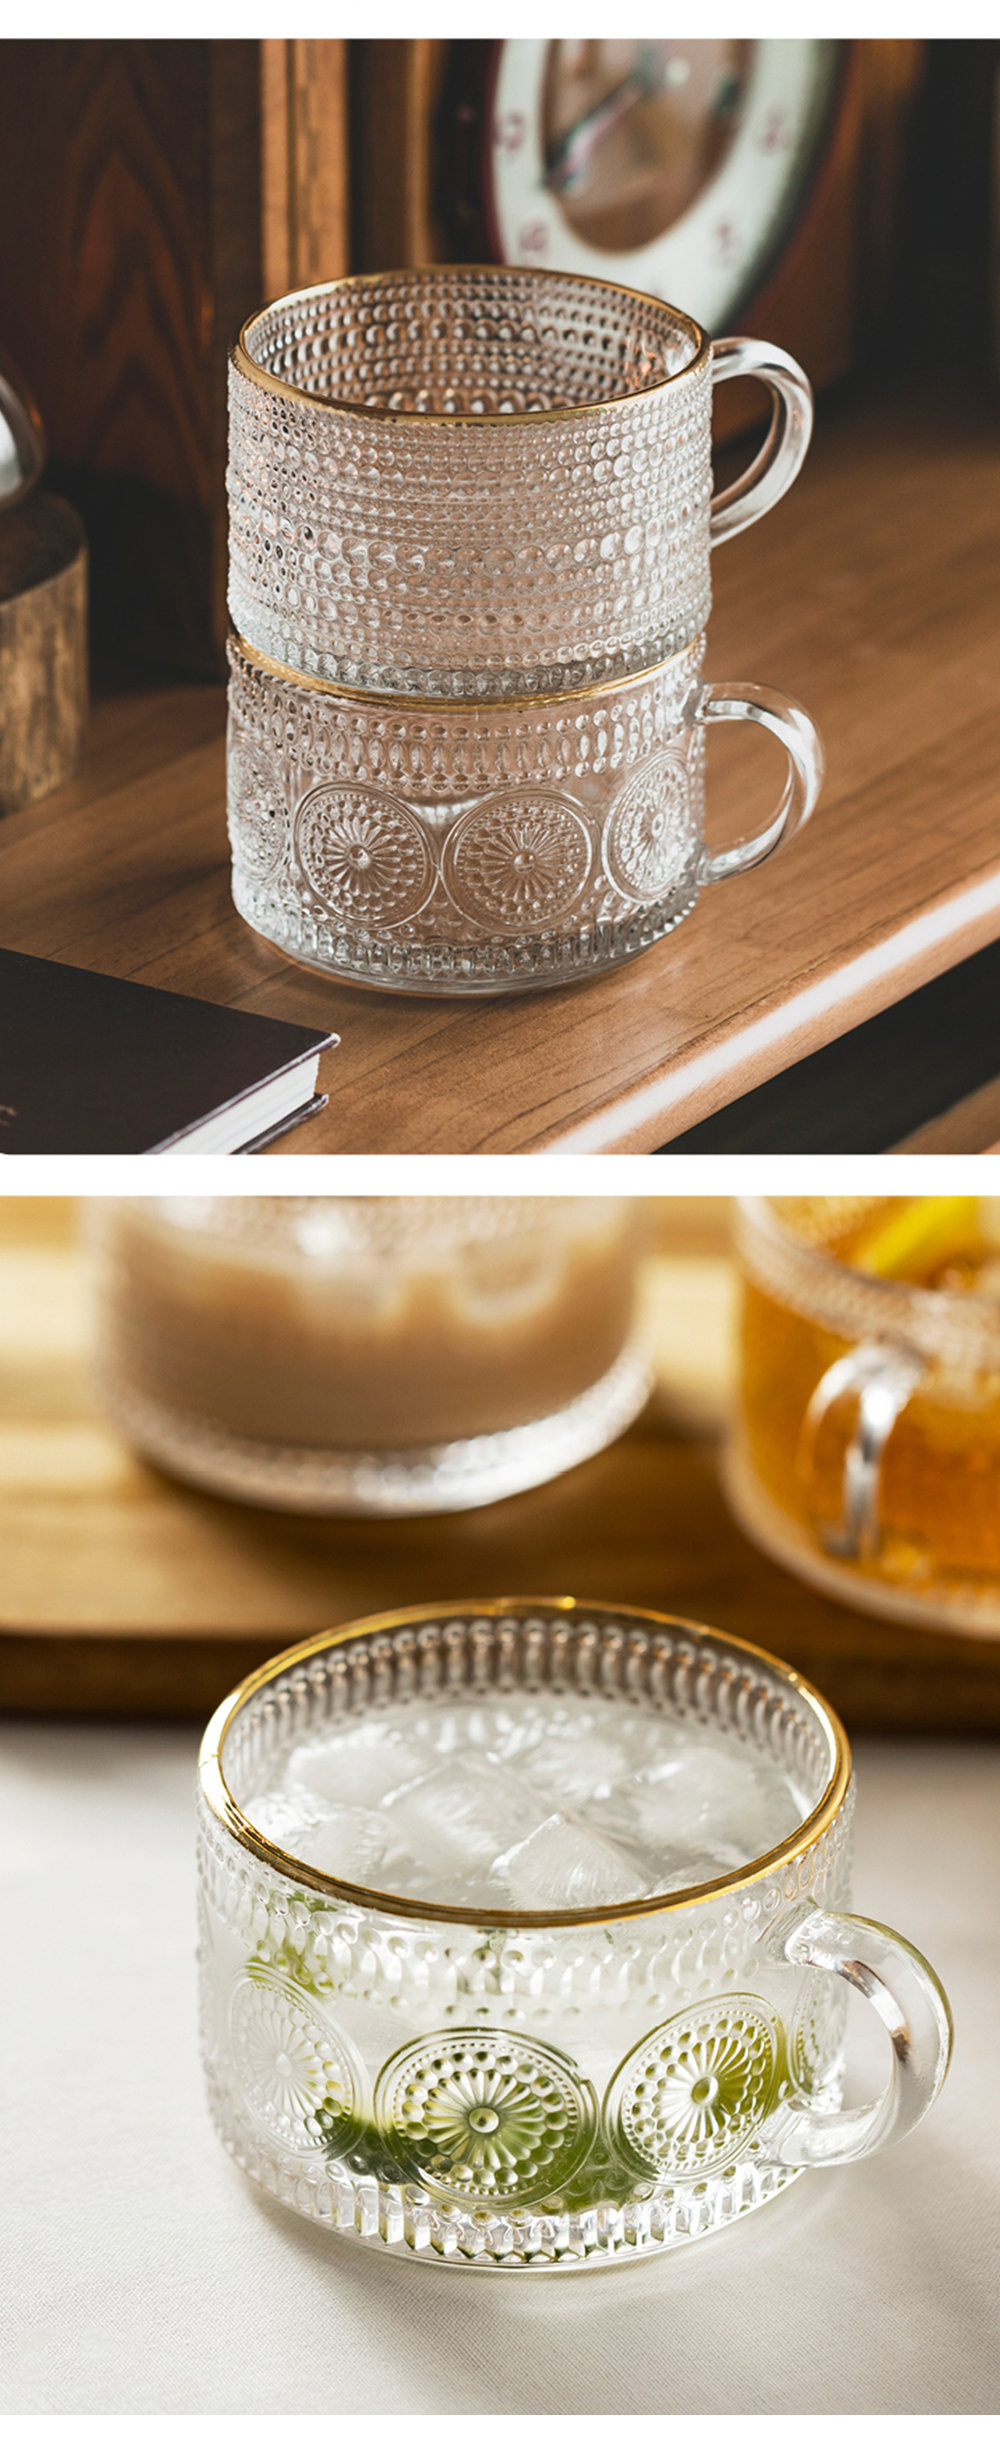 Beautiful Cup - Soda Lime Glass - 4 Patterns from Apollo Box